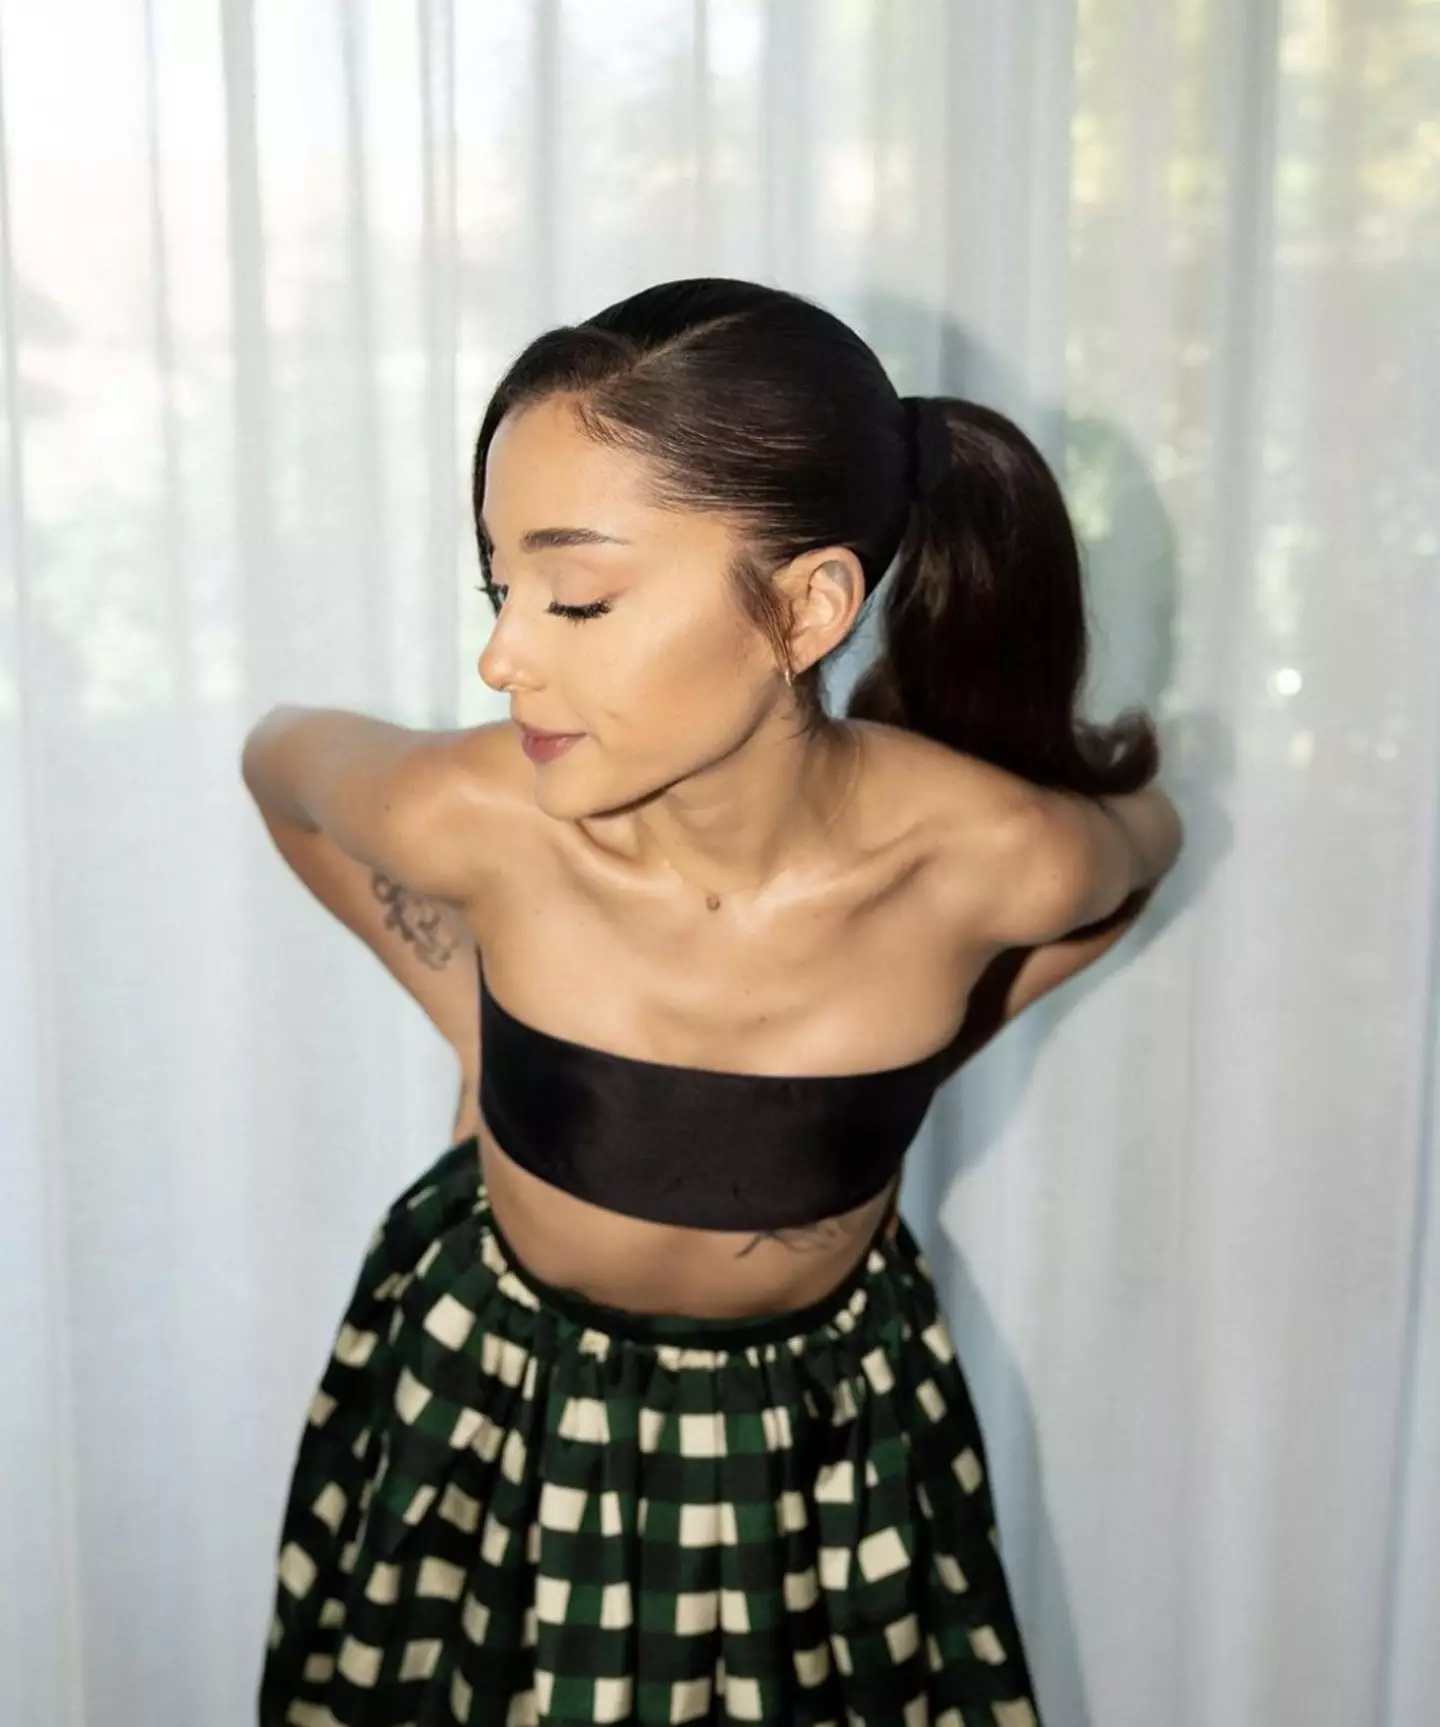 Ariana Grande has addressed her fans' concerns over her body image.